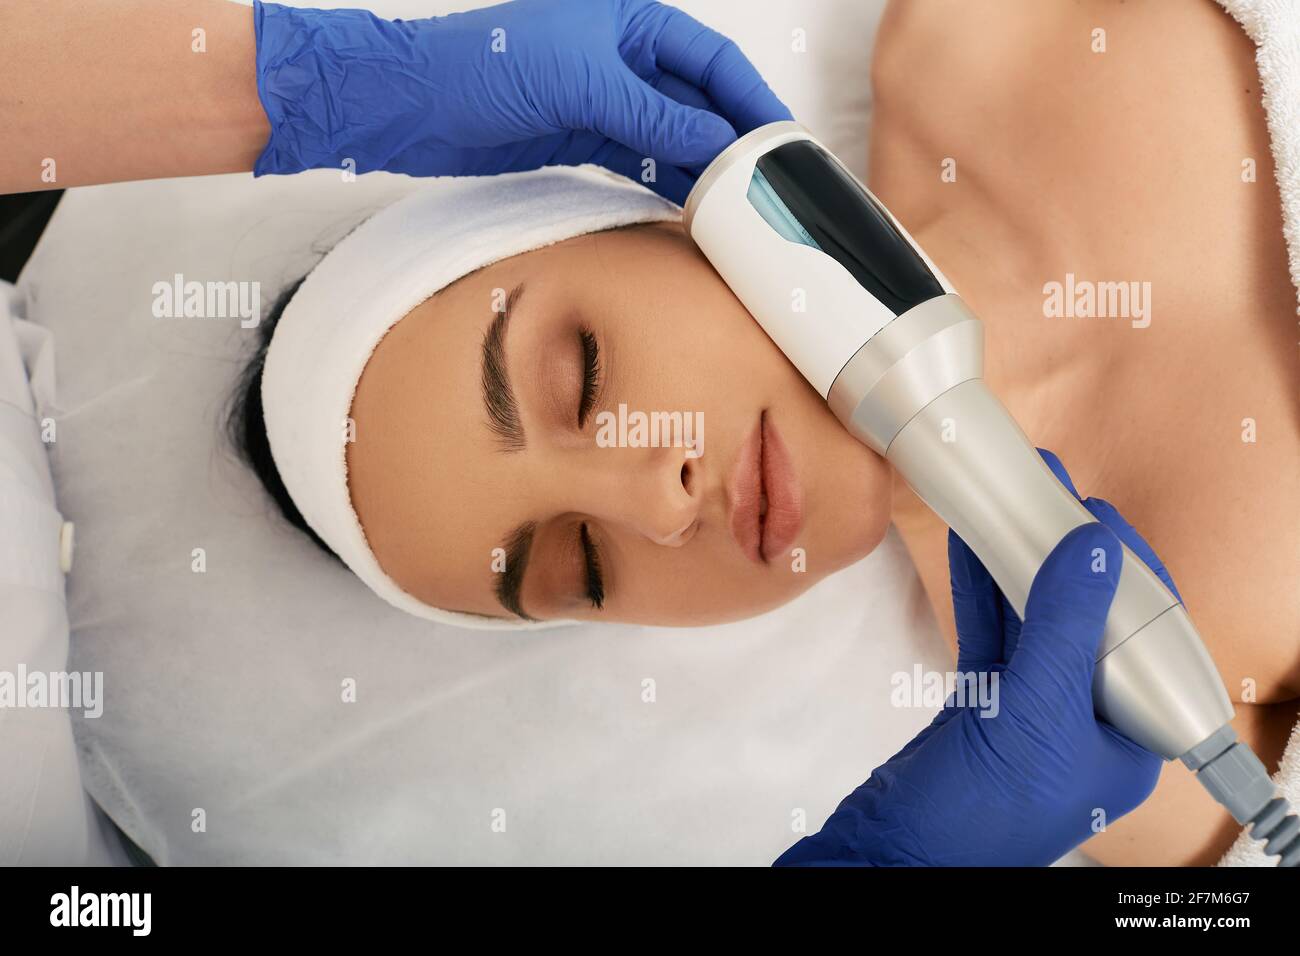 Cropped woman's face during facial endospheres therapy for correction oval face with a cosmetologist Stock Photo